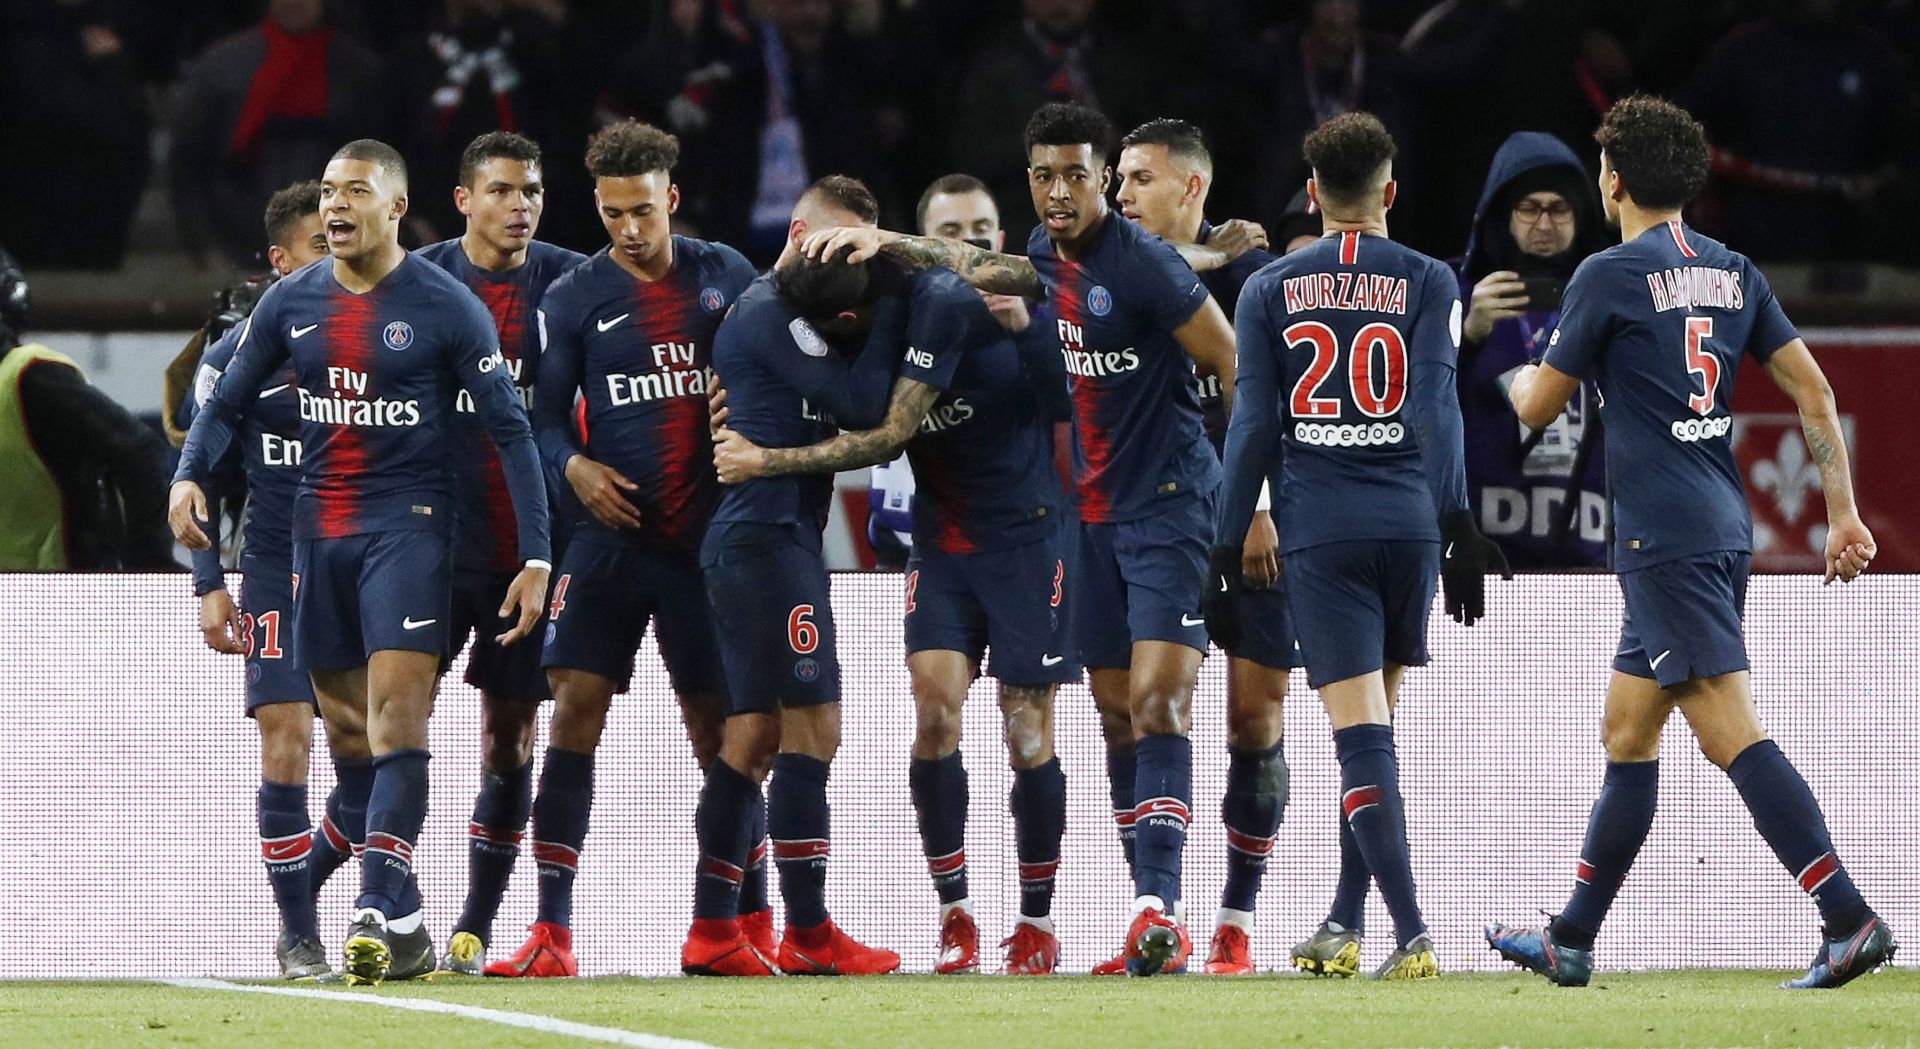 epa07445918 Paris Saint-Germain's Kylian Mbappe (L) celebrates with his teammates after scoring the 1-0 lead during the French Ligue 1 soccer match between Paris Saint-Germain (PSG) and Olympique Marseille at the Parc des Princes stadium in Paris, France, 17 March 2019.  EPA/YOAN VALAT